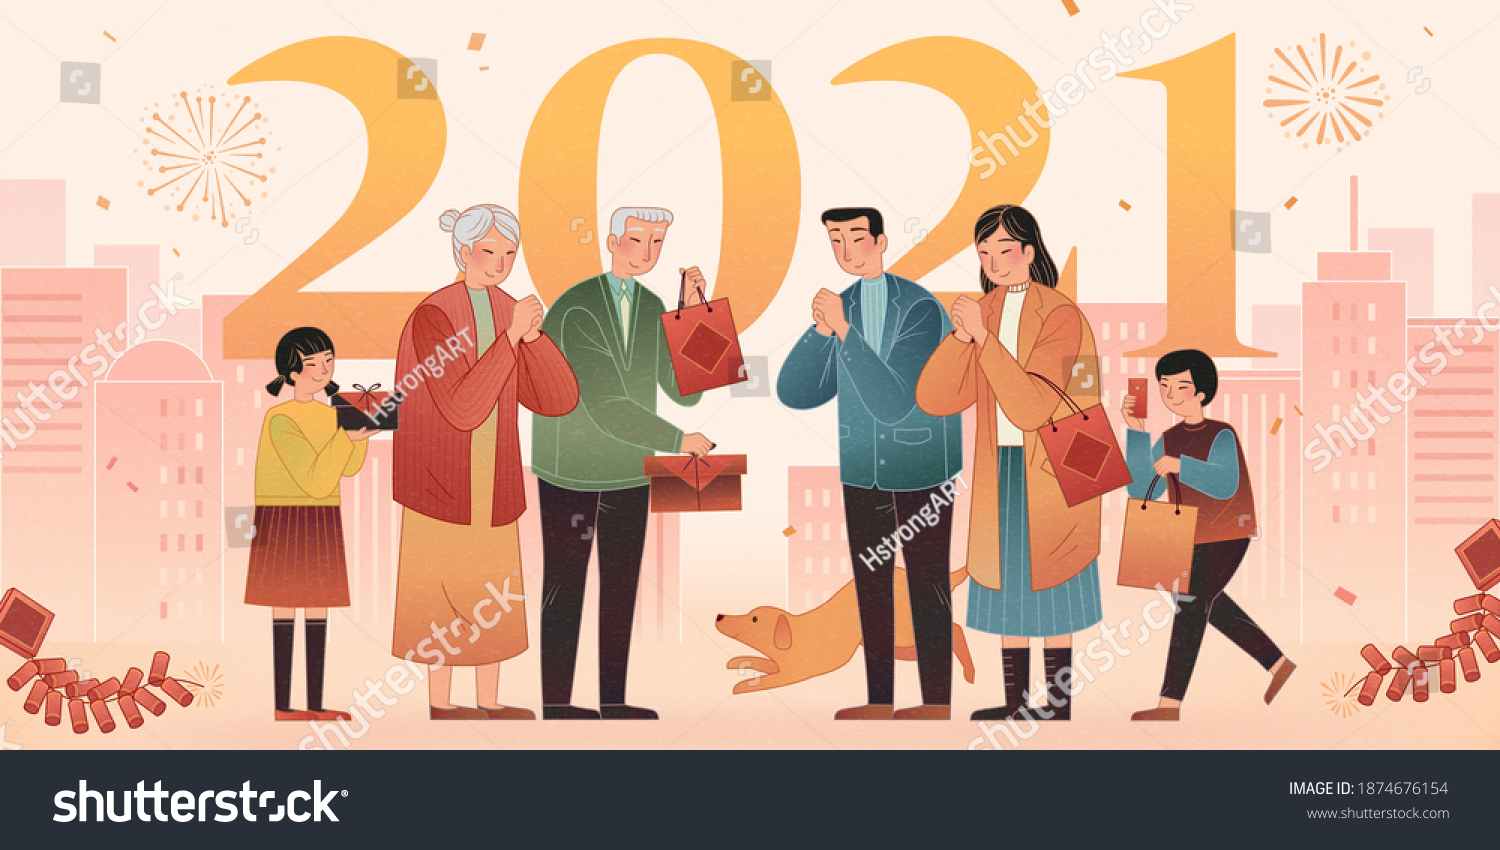 2021 Celebration banner. Asian family making greeting gestures on city silhouette background. #1874676154